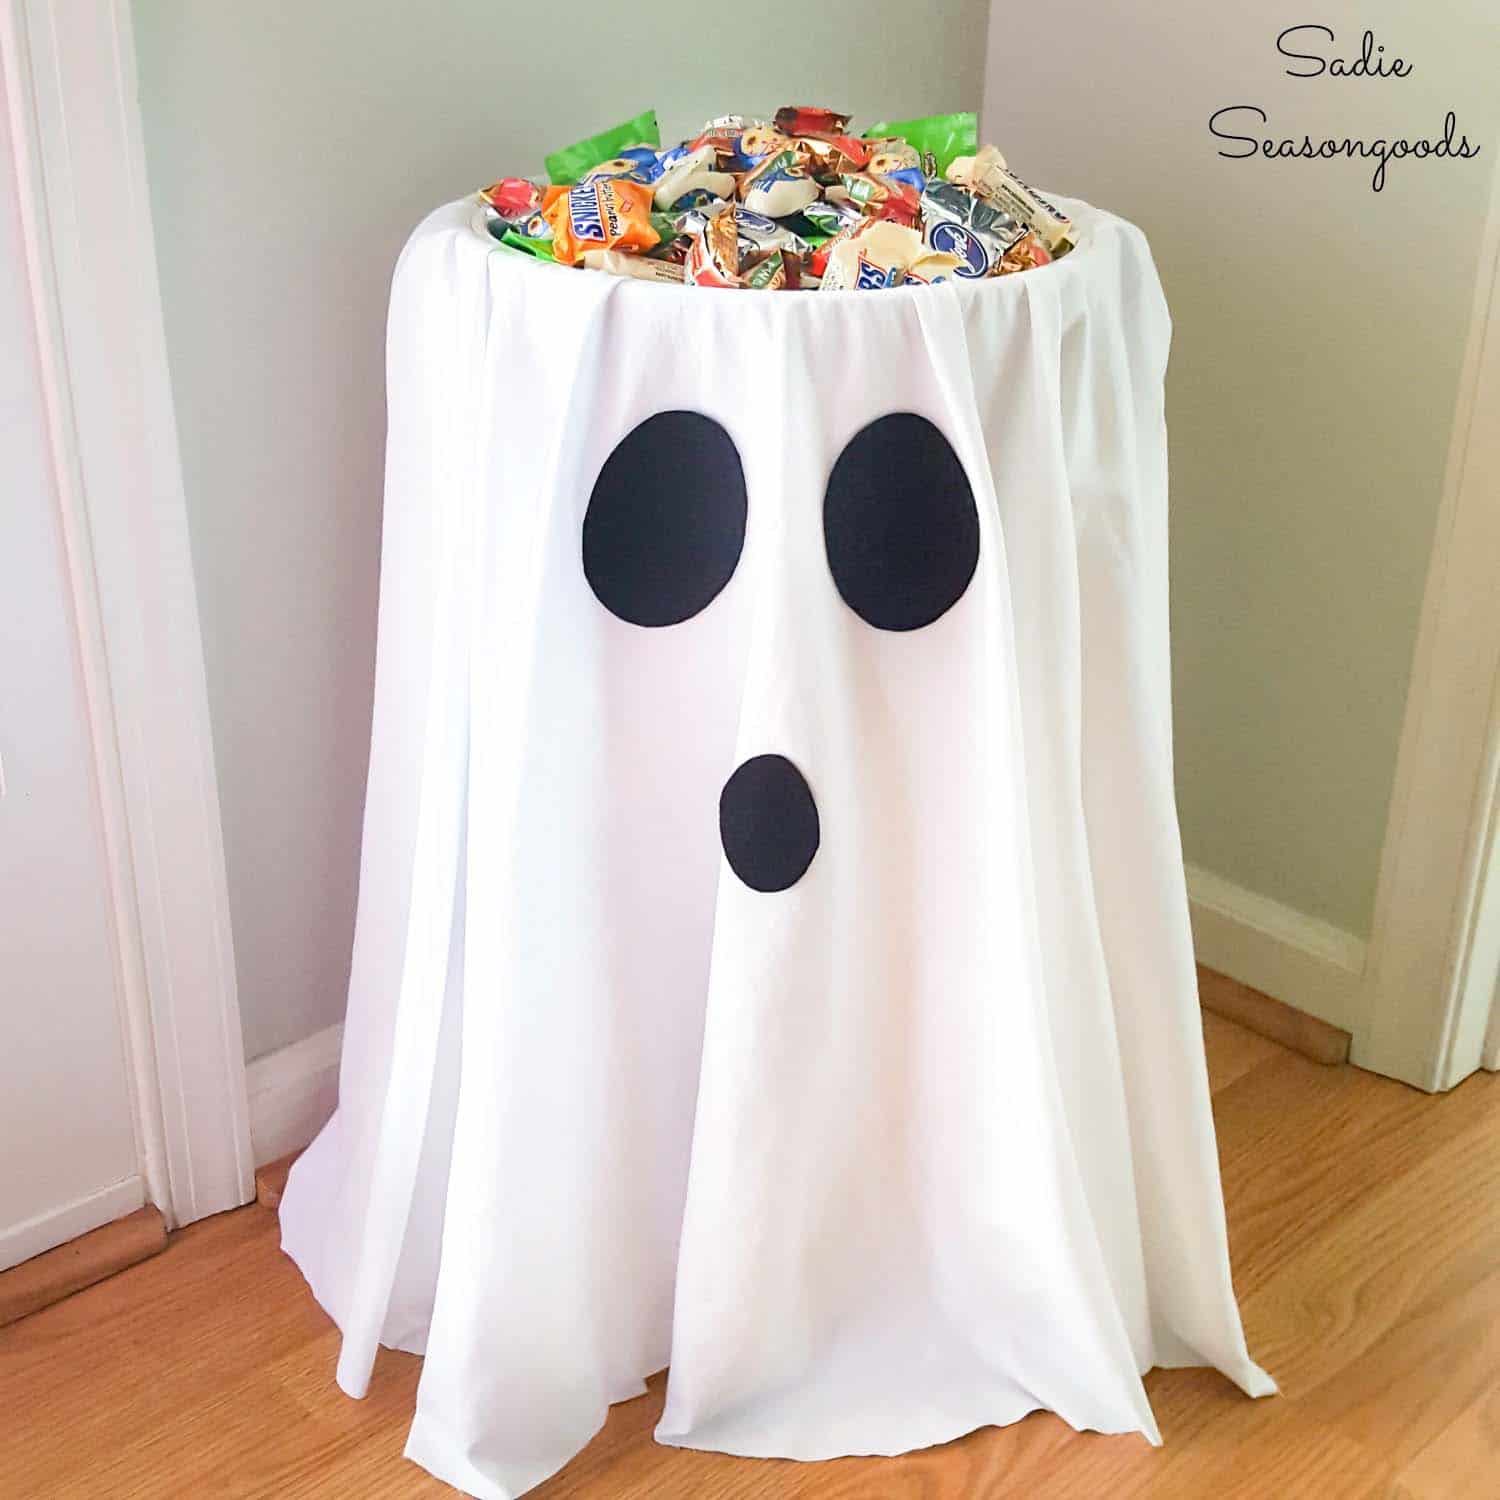 candy bowl holder for Halloween